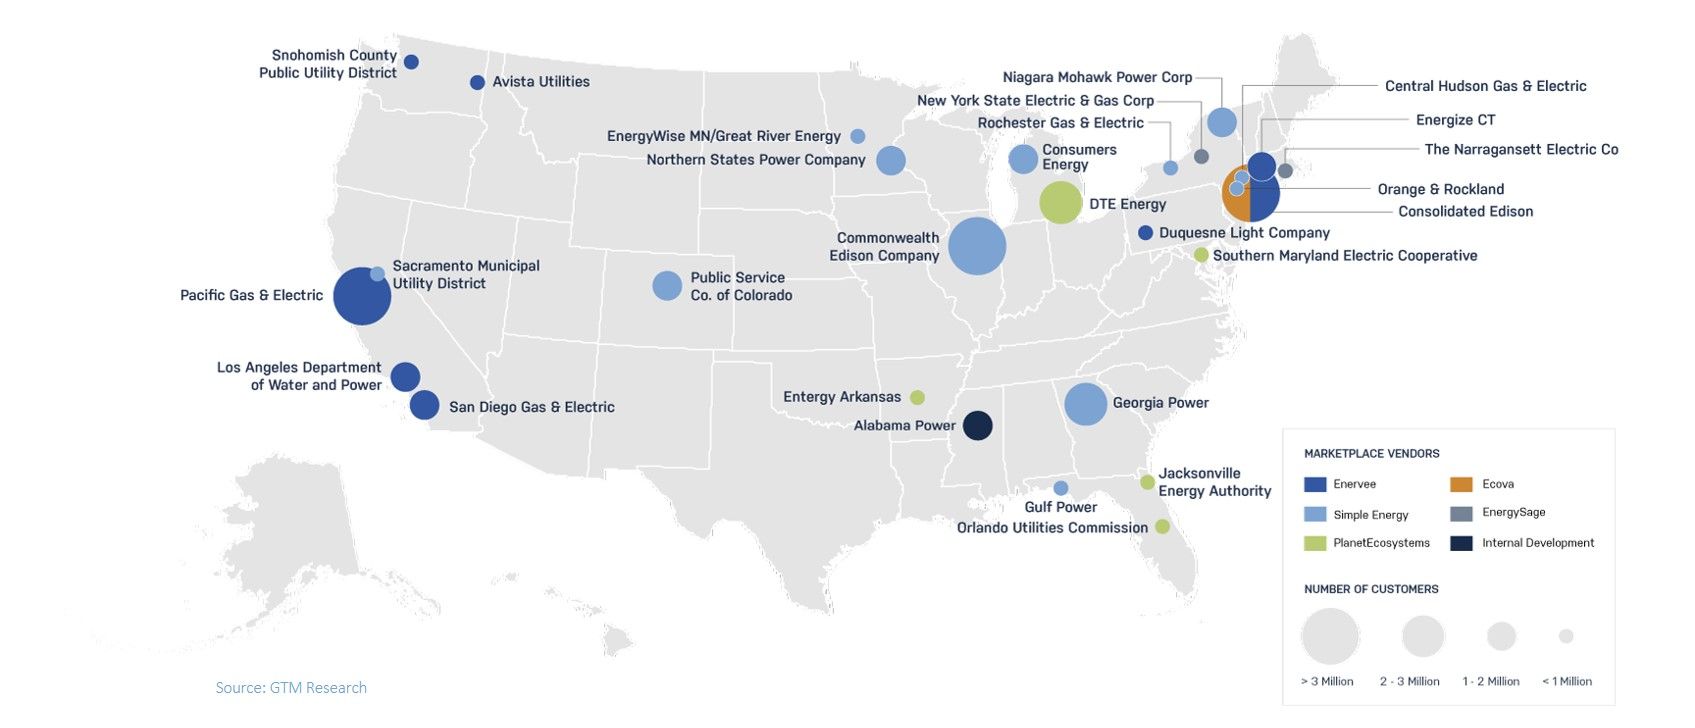 der marketplaces in the united states, gtm research